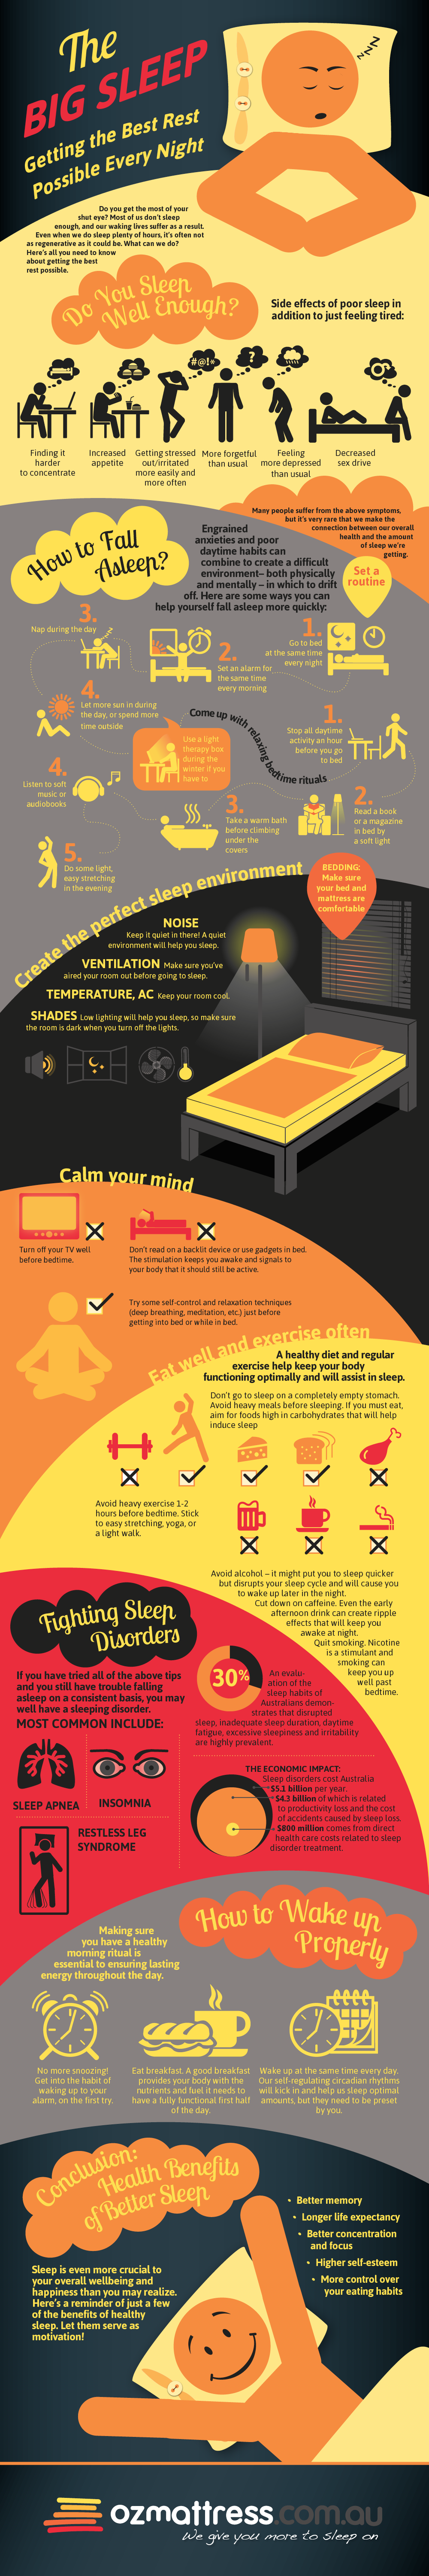 An Infographic To Help You Get The Best Sleep